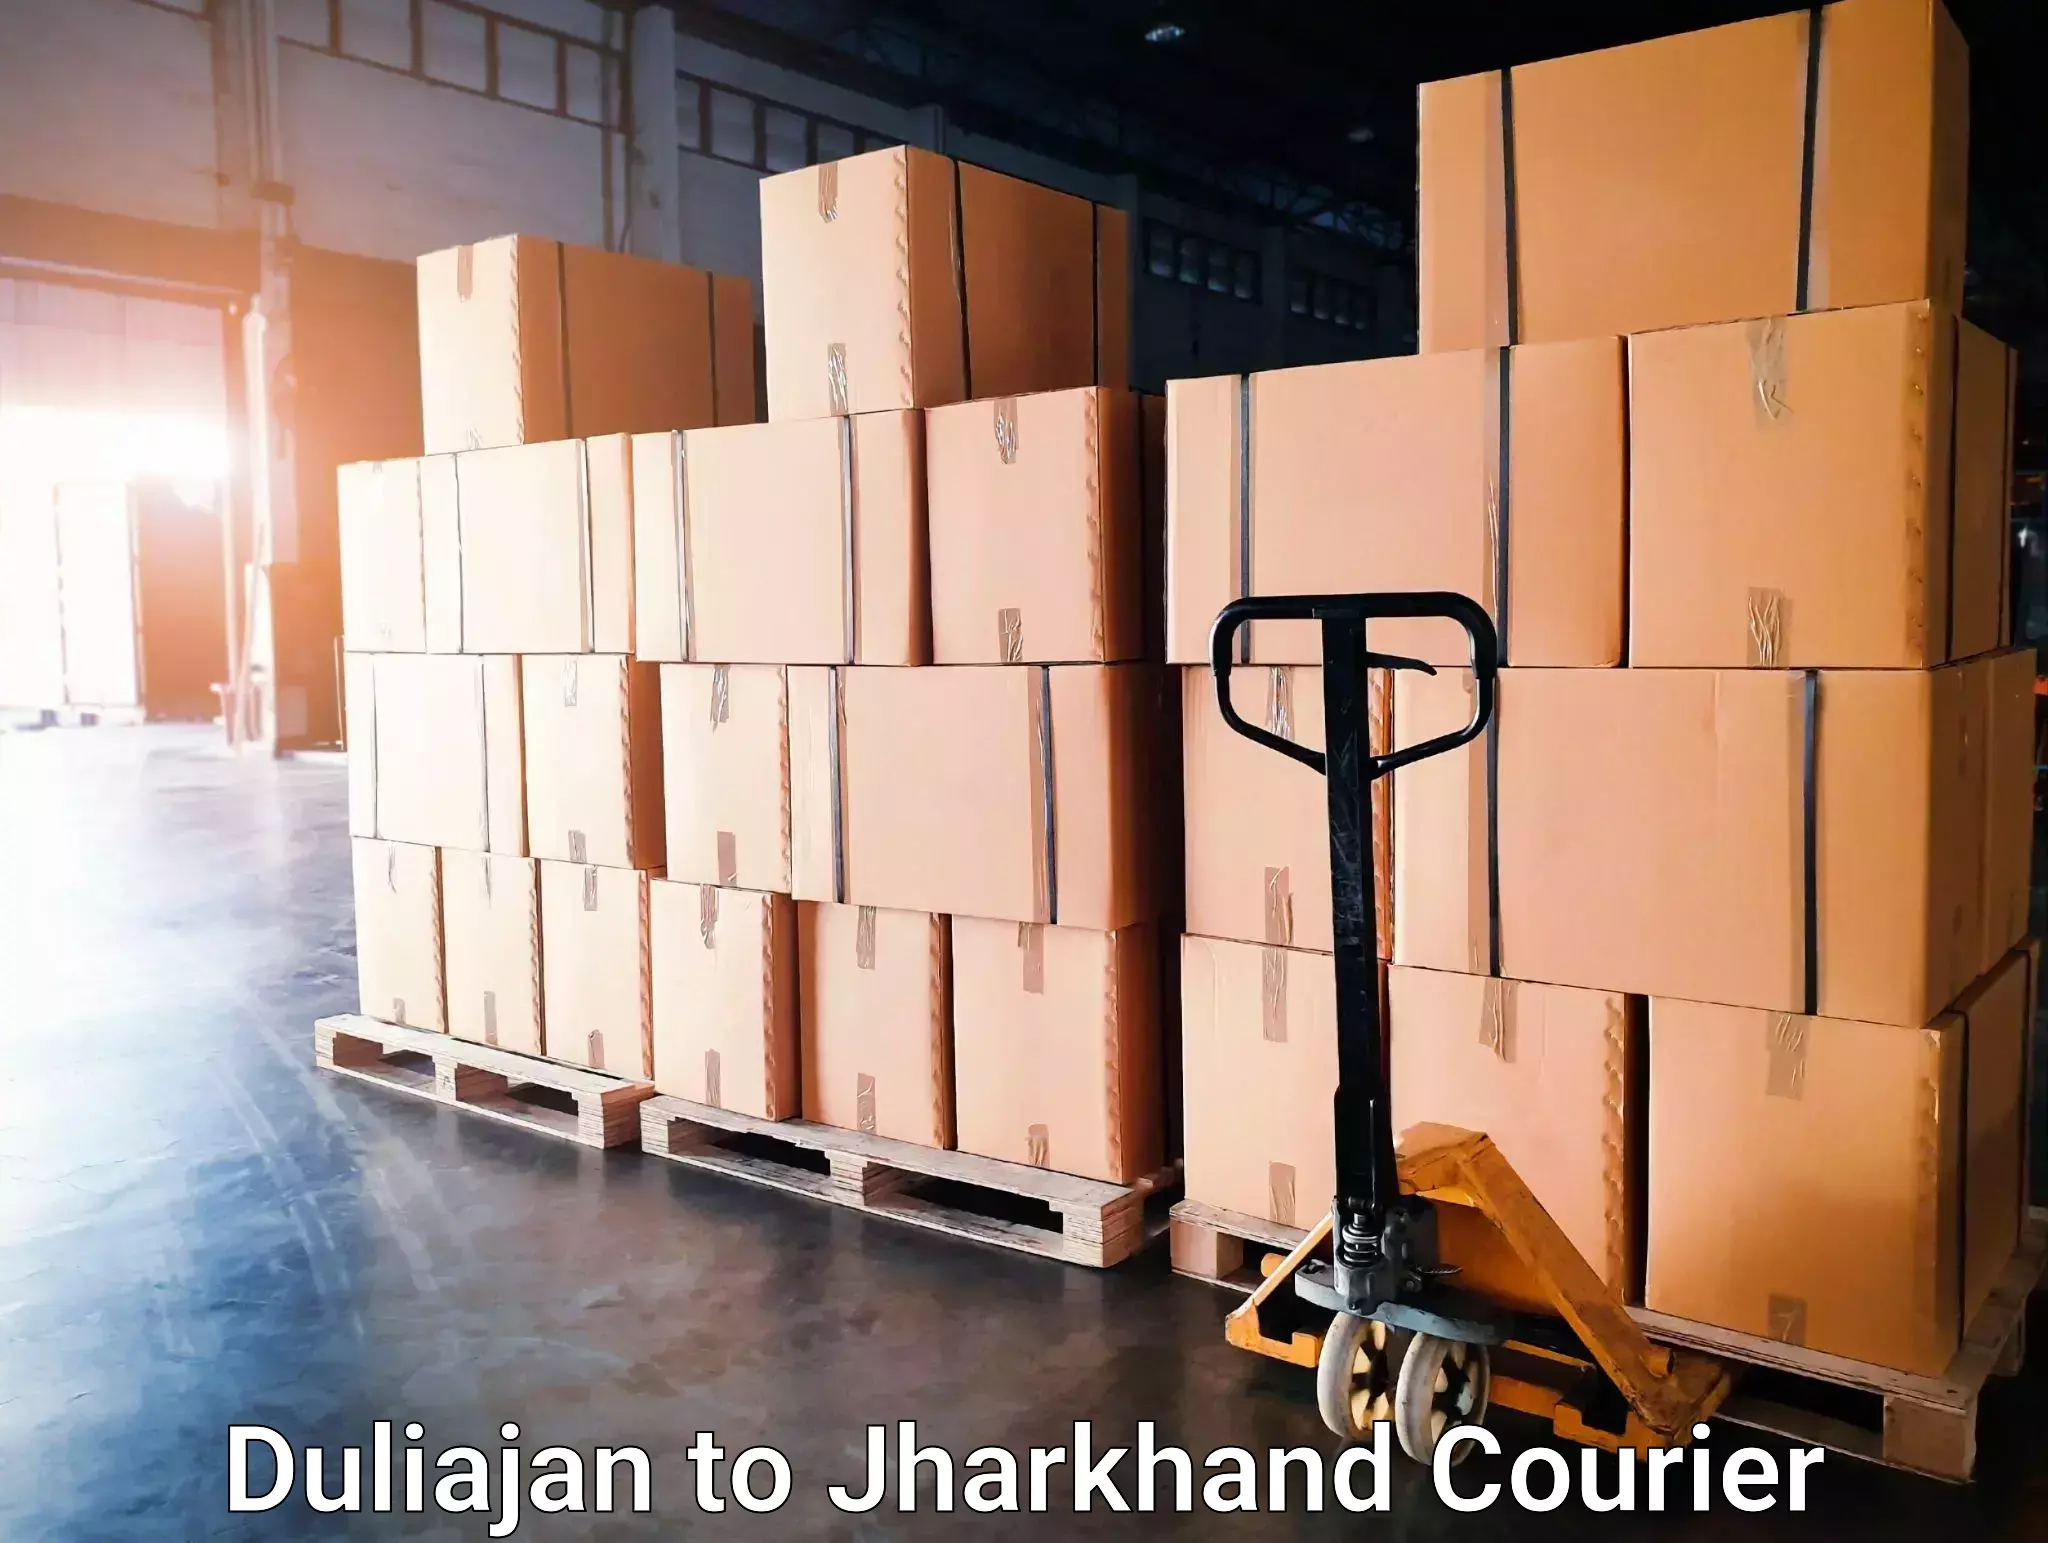 State-of-the-art courier technology Duliajan to Domchanch